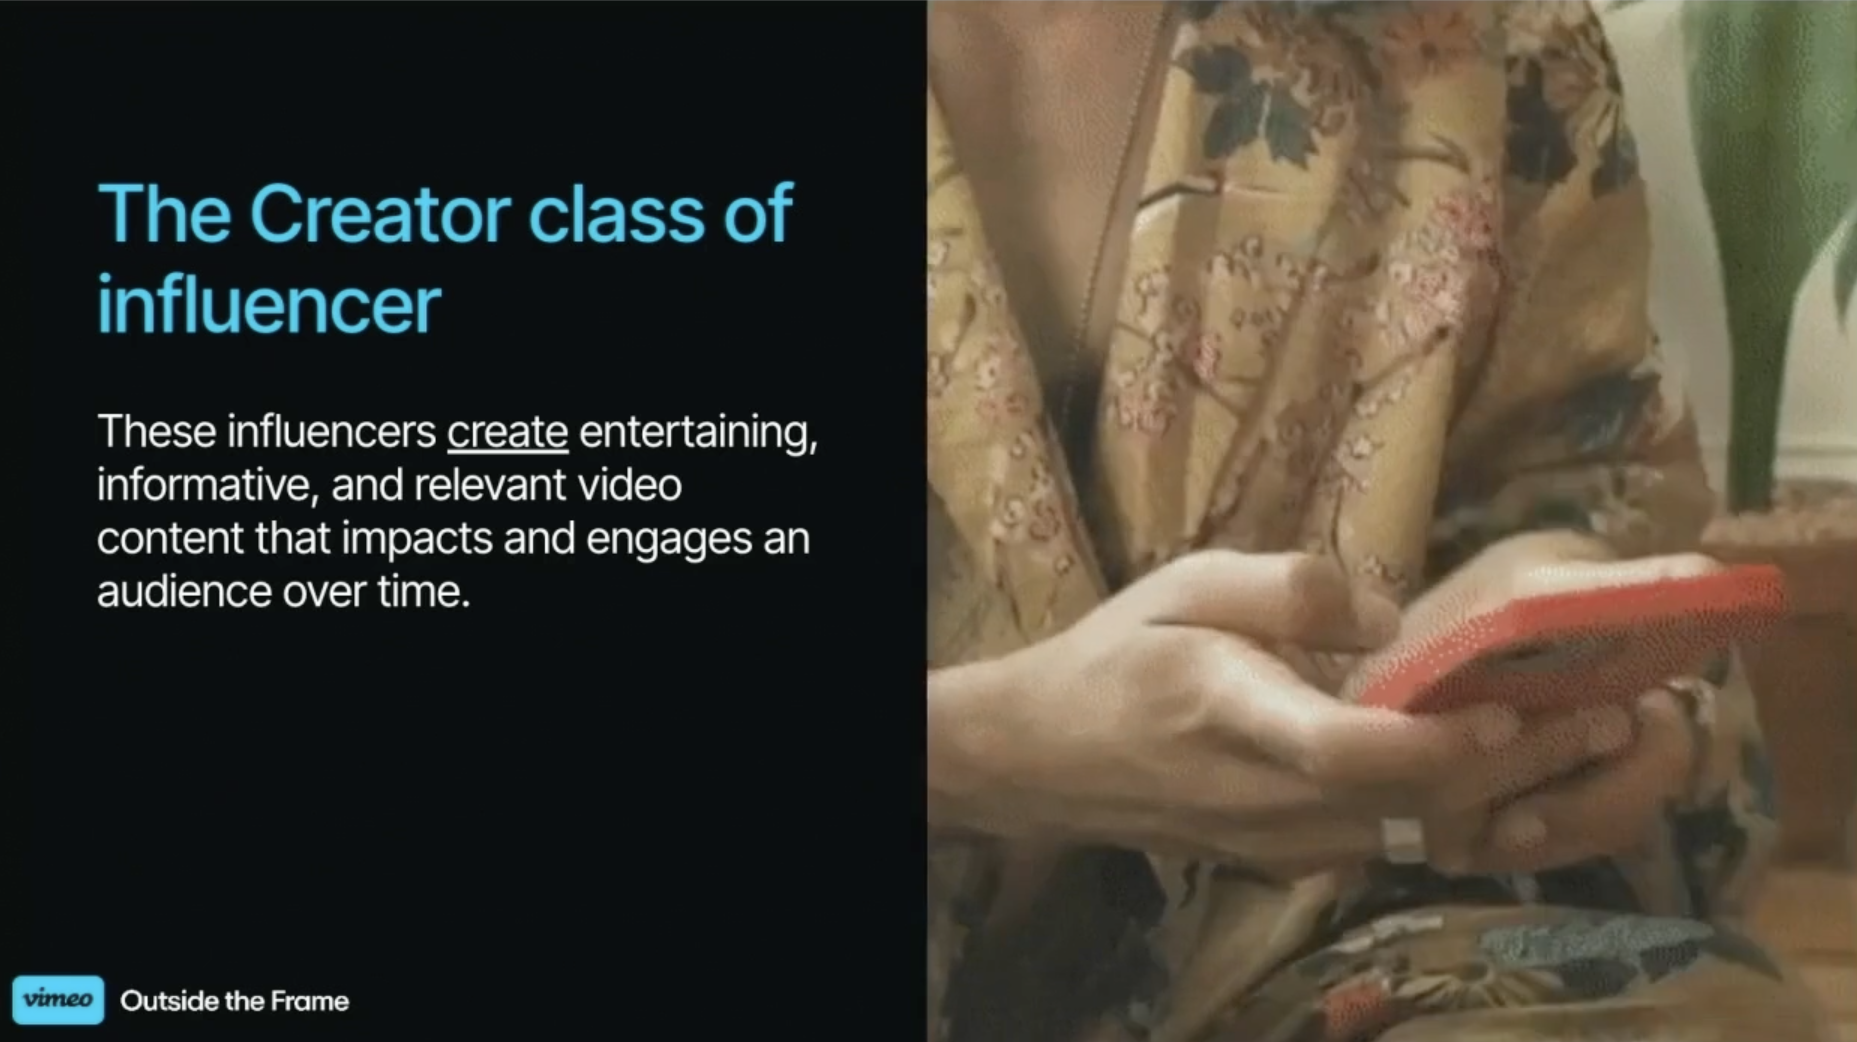 From Gavin Gudry’s presentation “The Road to Relevant Video Content”